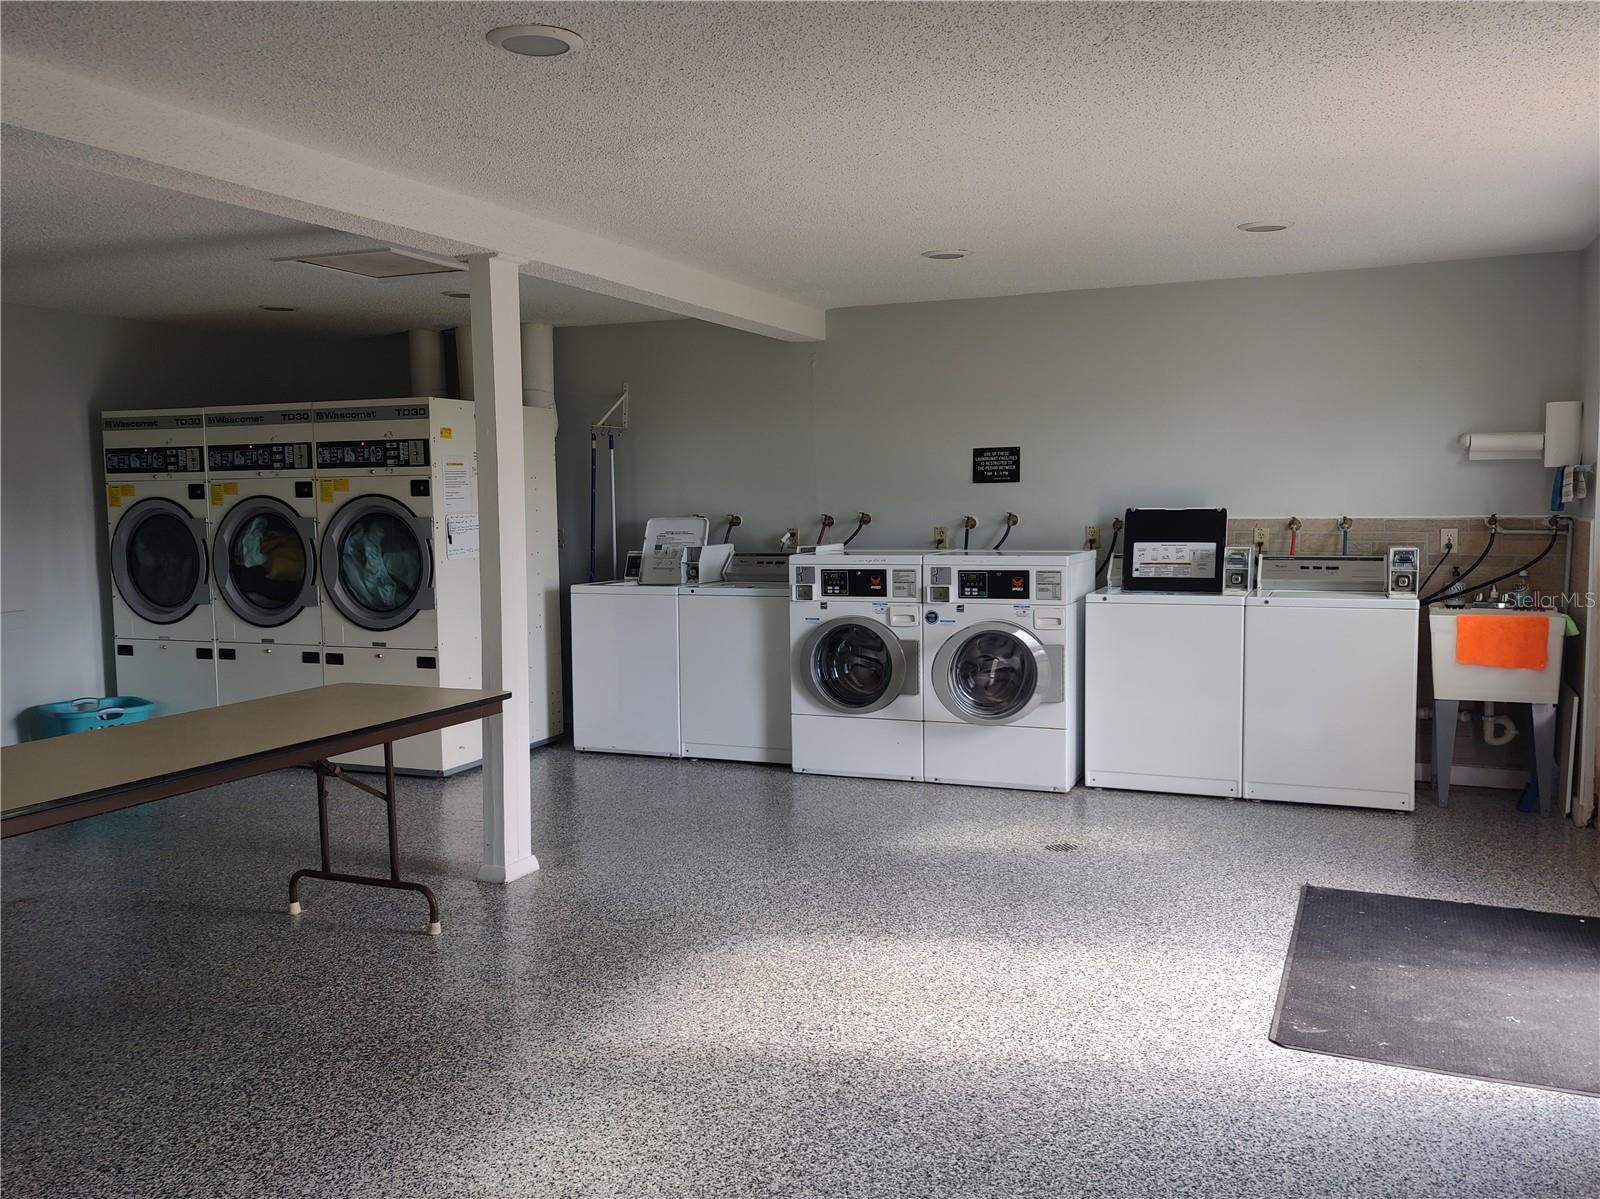 Laundry is equipped to handle larger laundry needs.